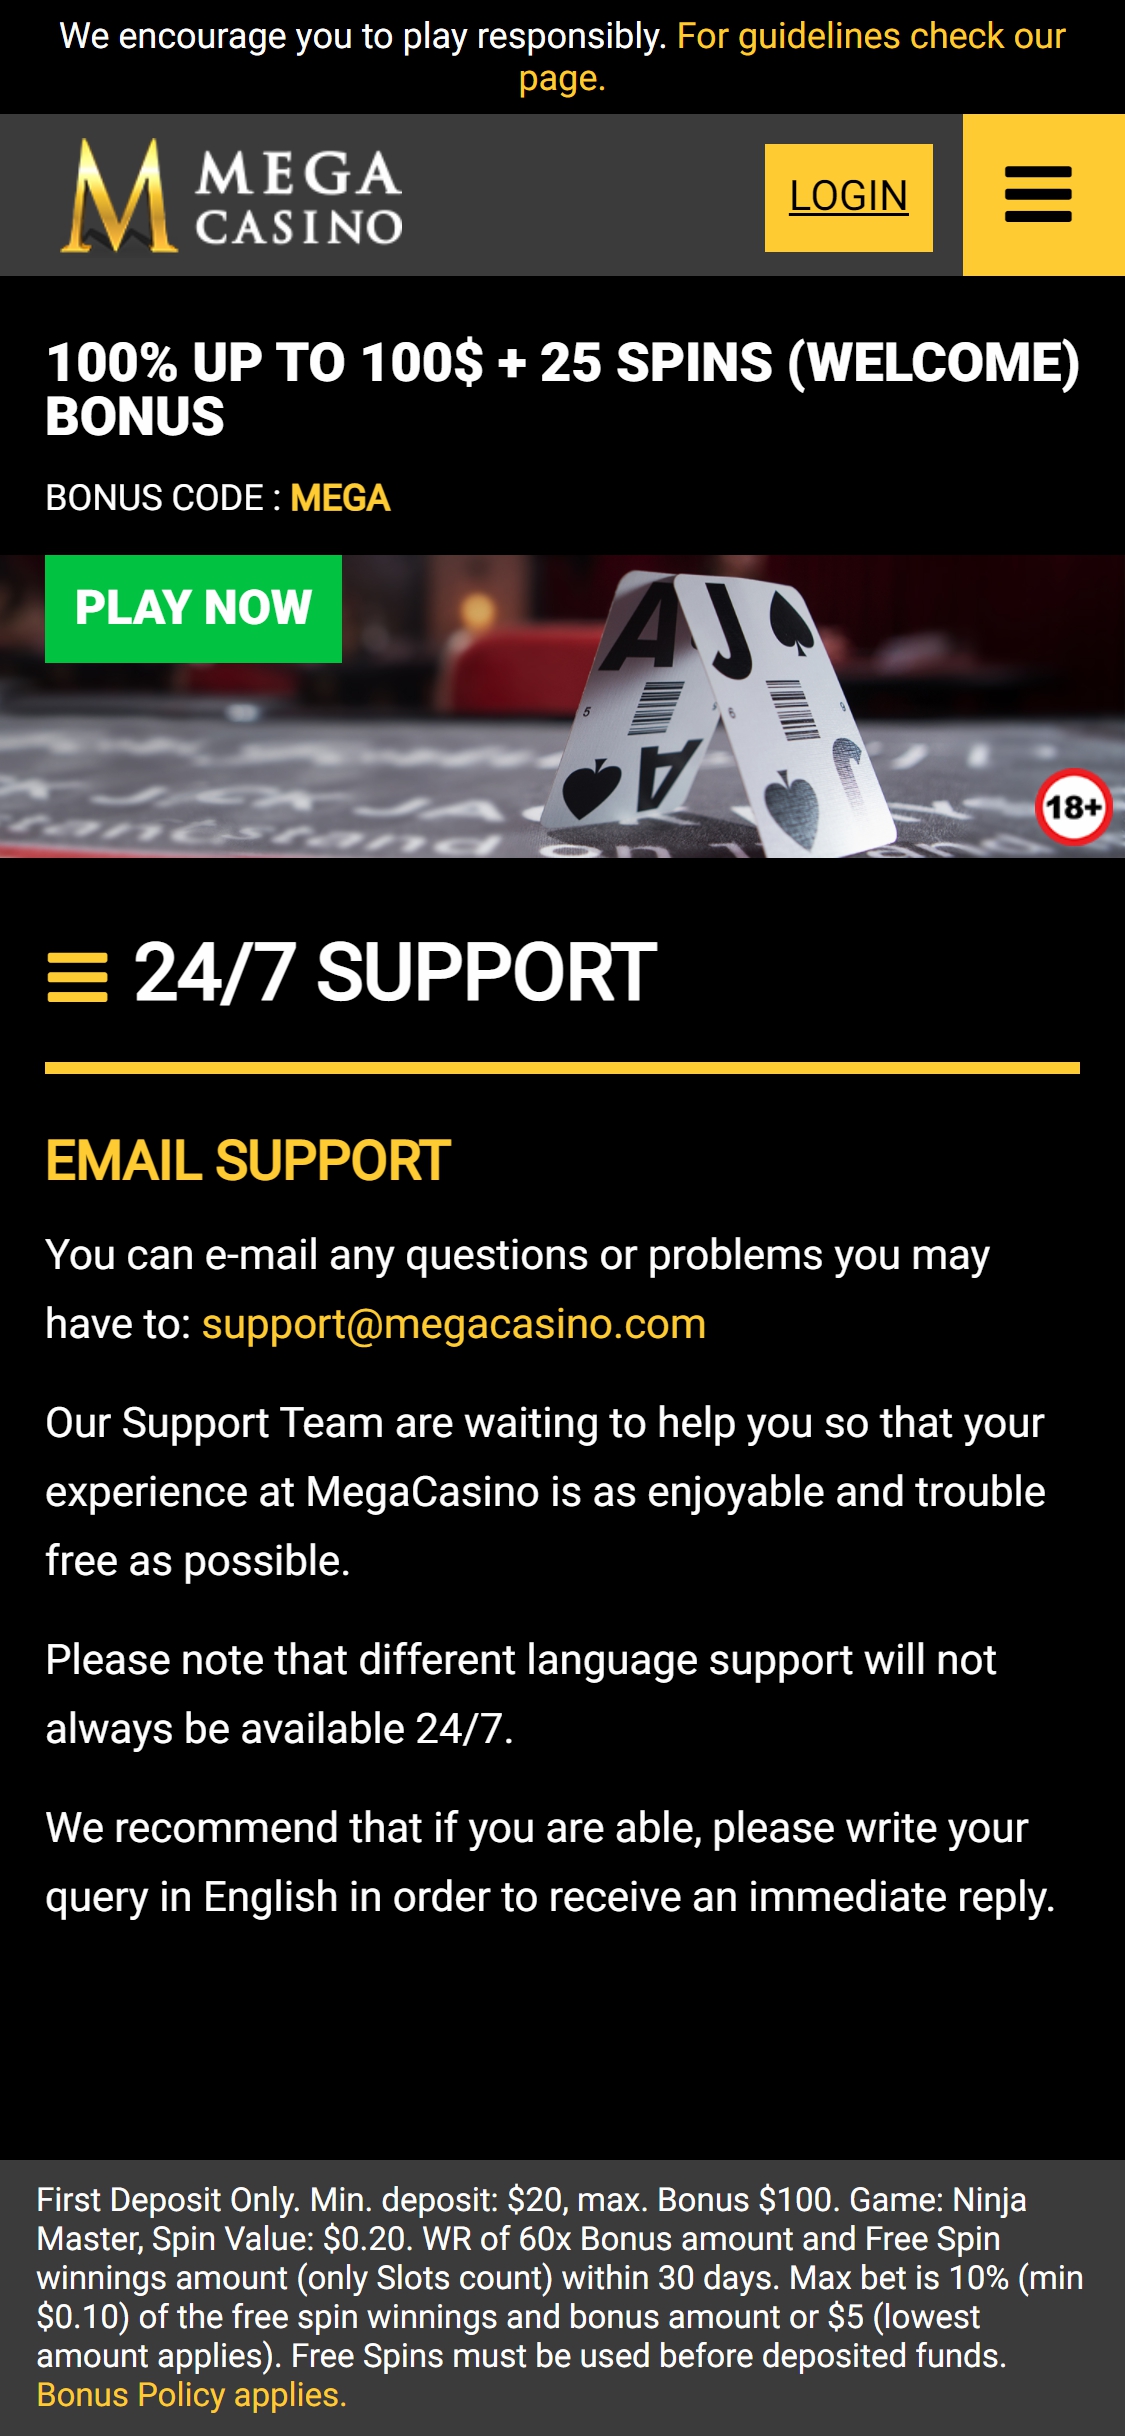 Mega Casino Mobile Support Review